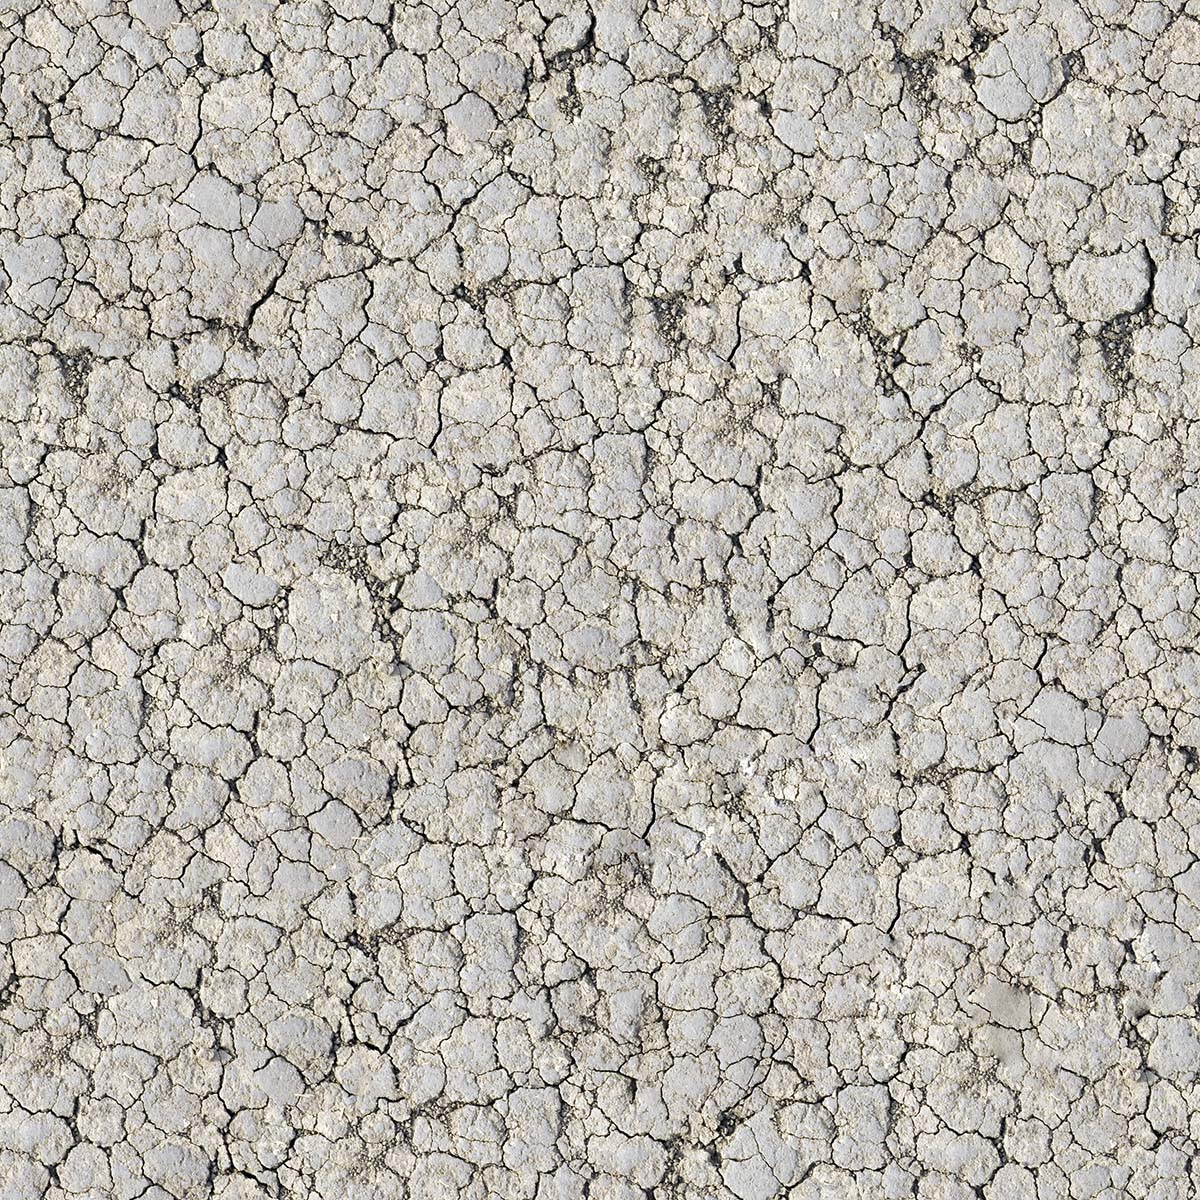 A close-up of a cracked ground